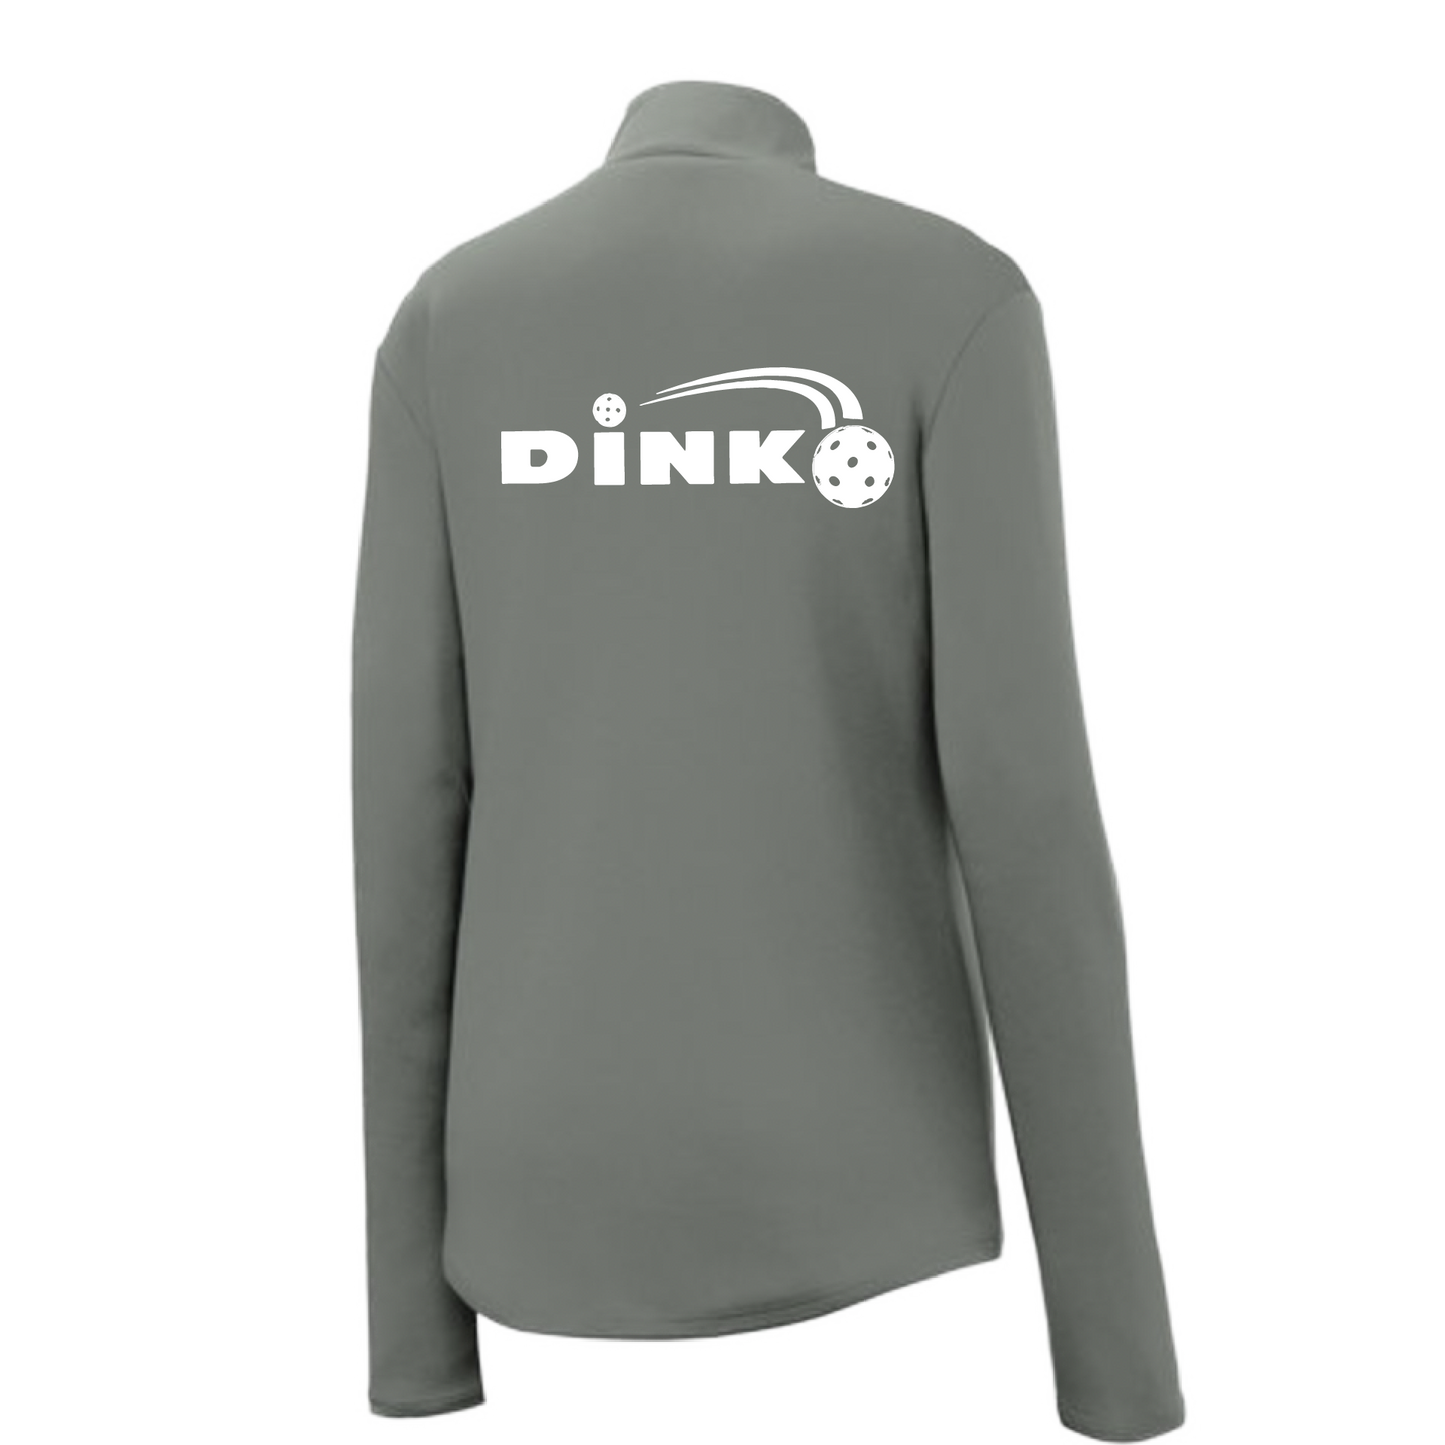 Pickleball Design: Dink  Women's 1/4-Zip Pullover: Princess seams and Drop tail hem.  Turn up the volume in this Women's shirt with its perfect mix of softness and attitude. Material is ultra-comfortable with moisture wicking properties and tri-blend softness. PosiCharge technology locks in color. Highly breathable and lightweight. Versatile enough for wearing year-round.